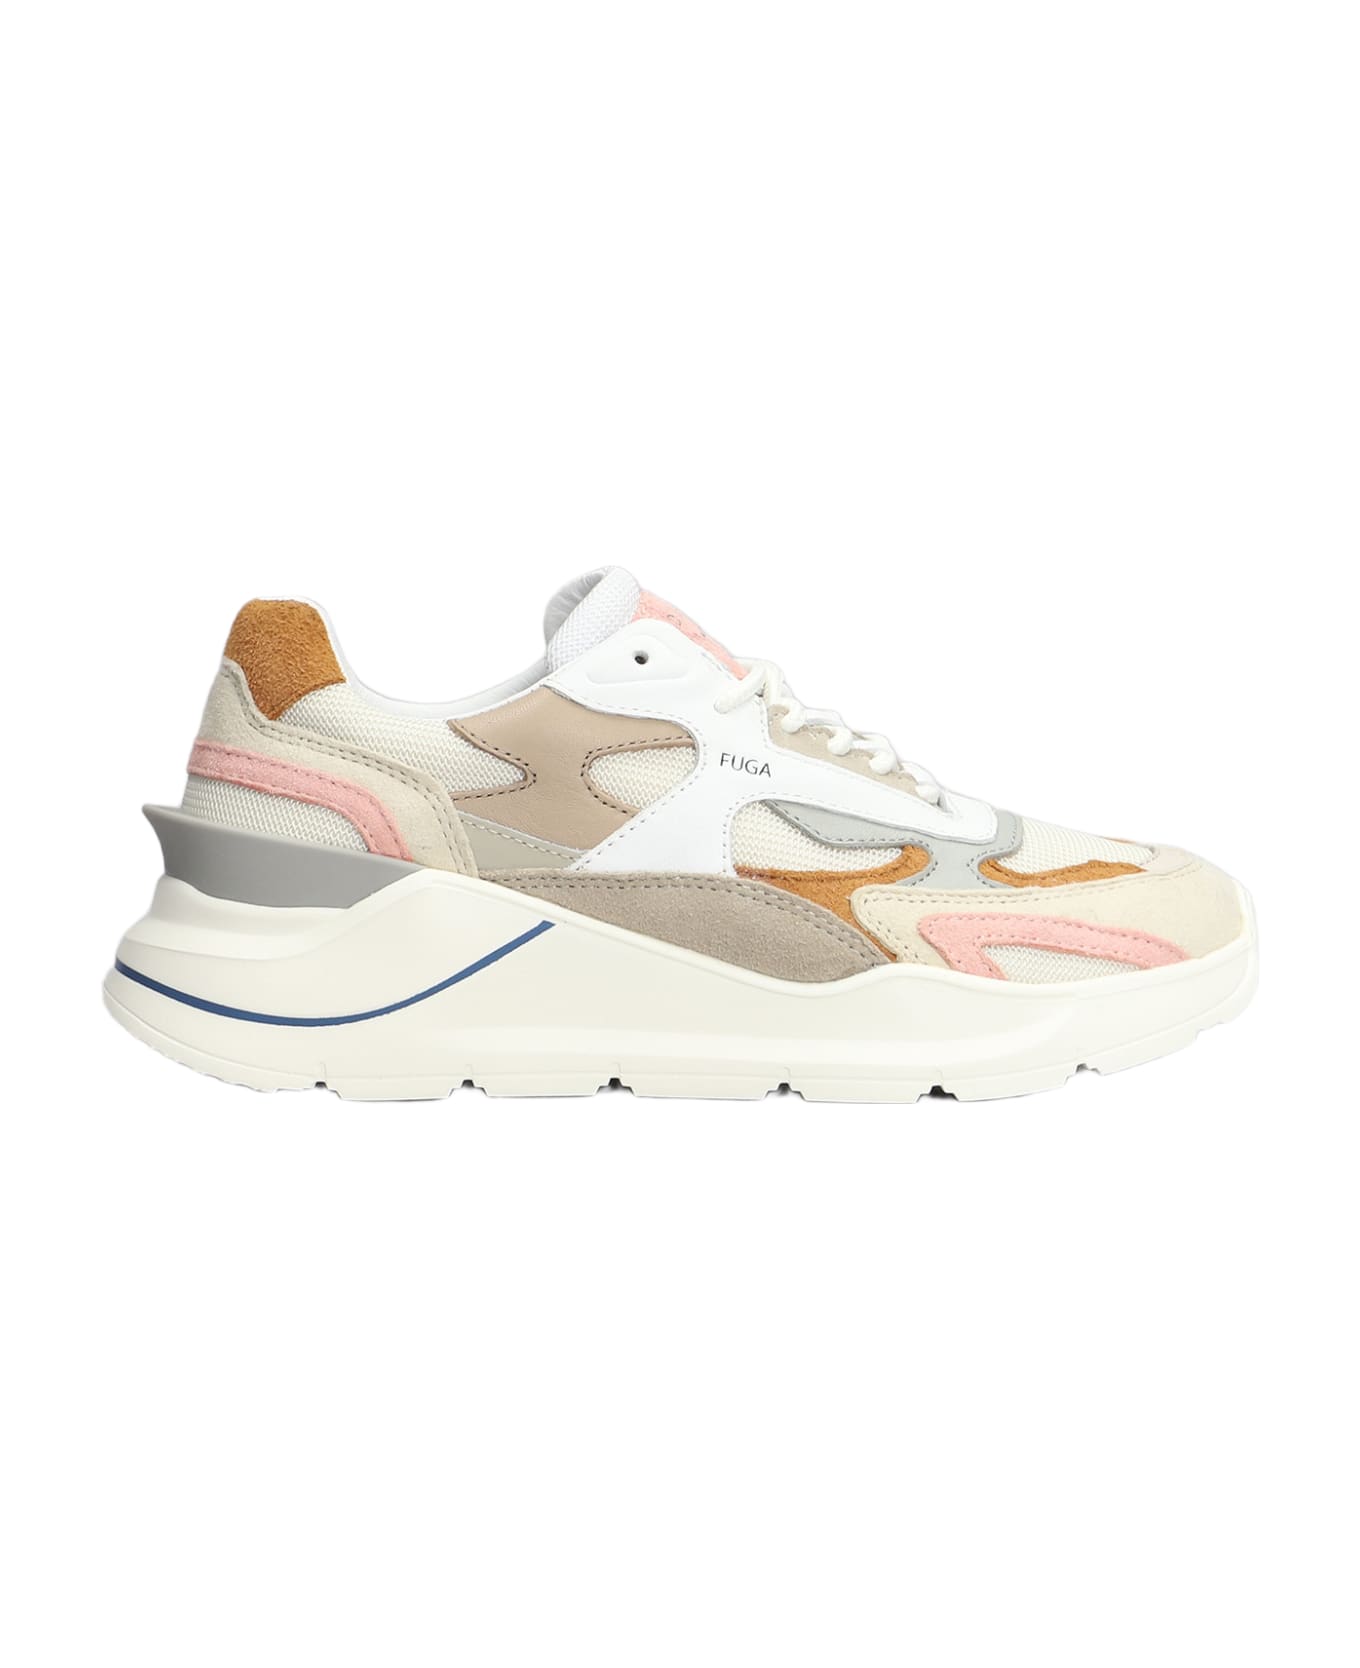 D.A.T.E. Fuga Sneakers In Beige Suede And Fabric - beige